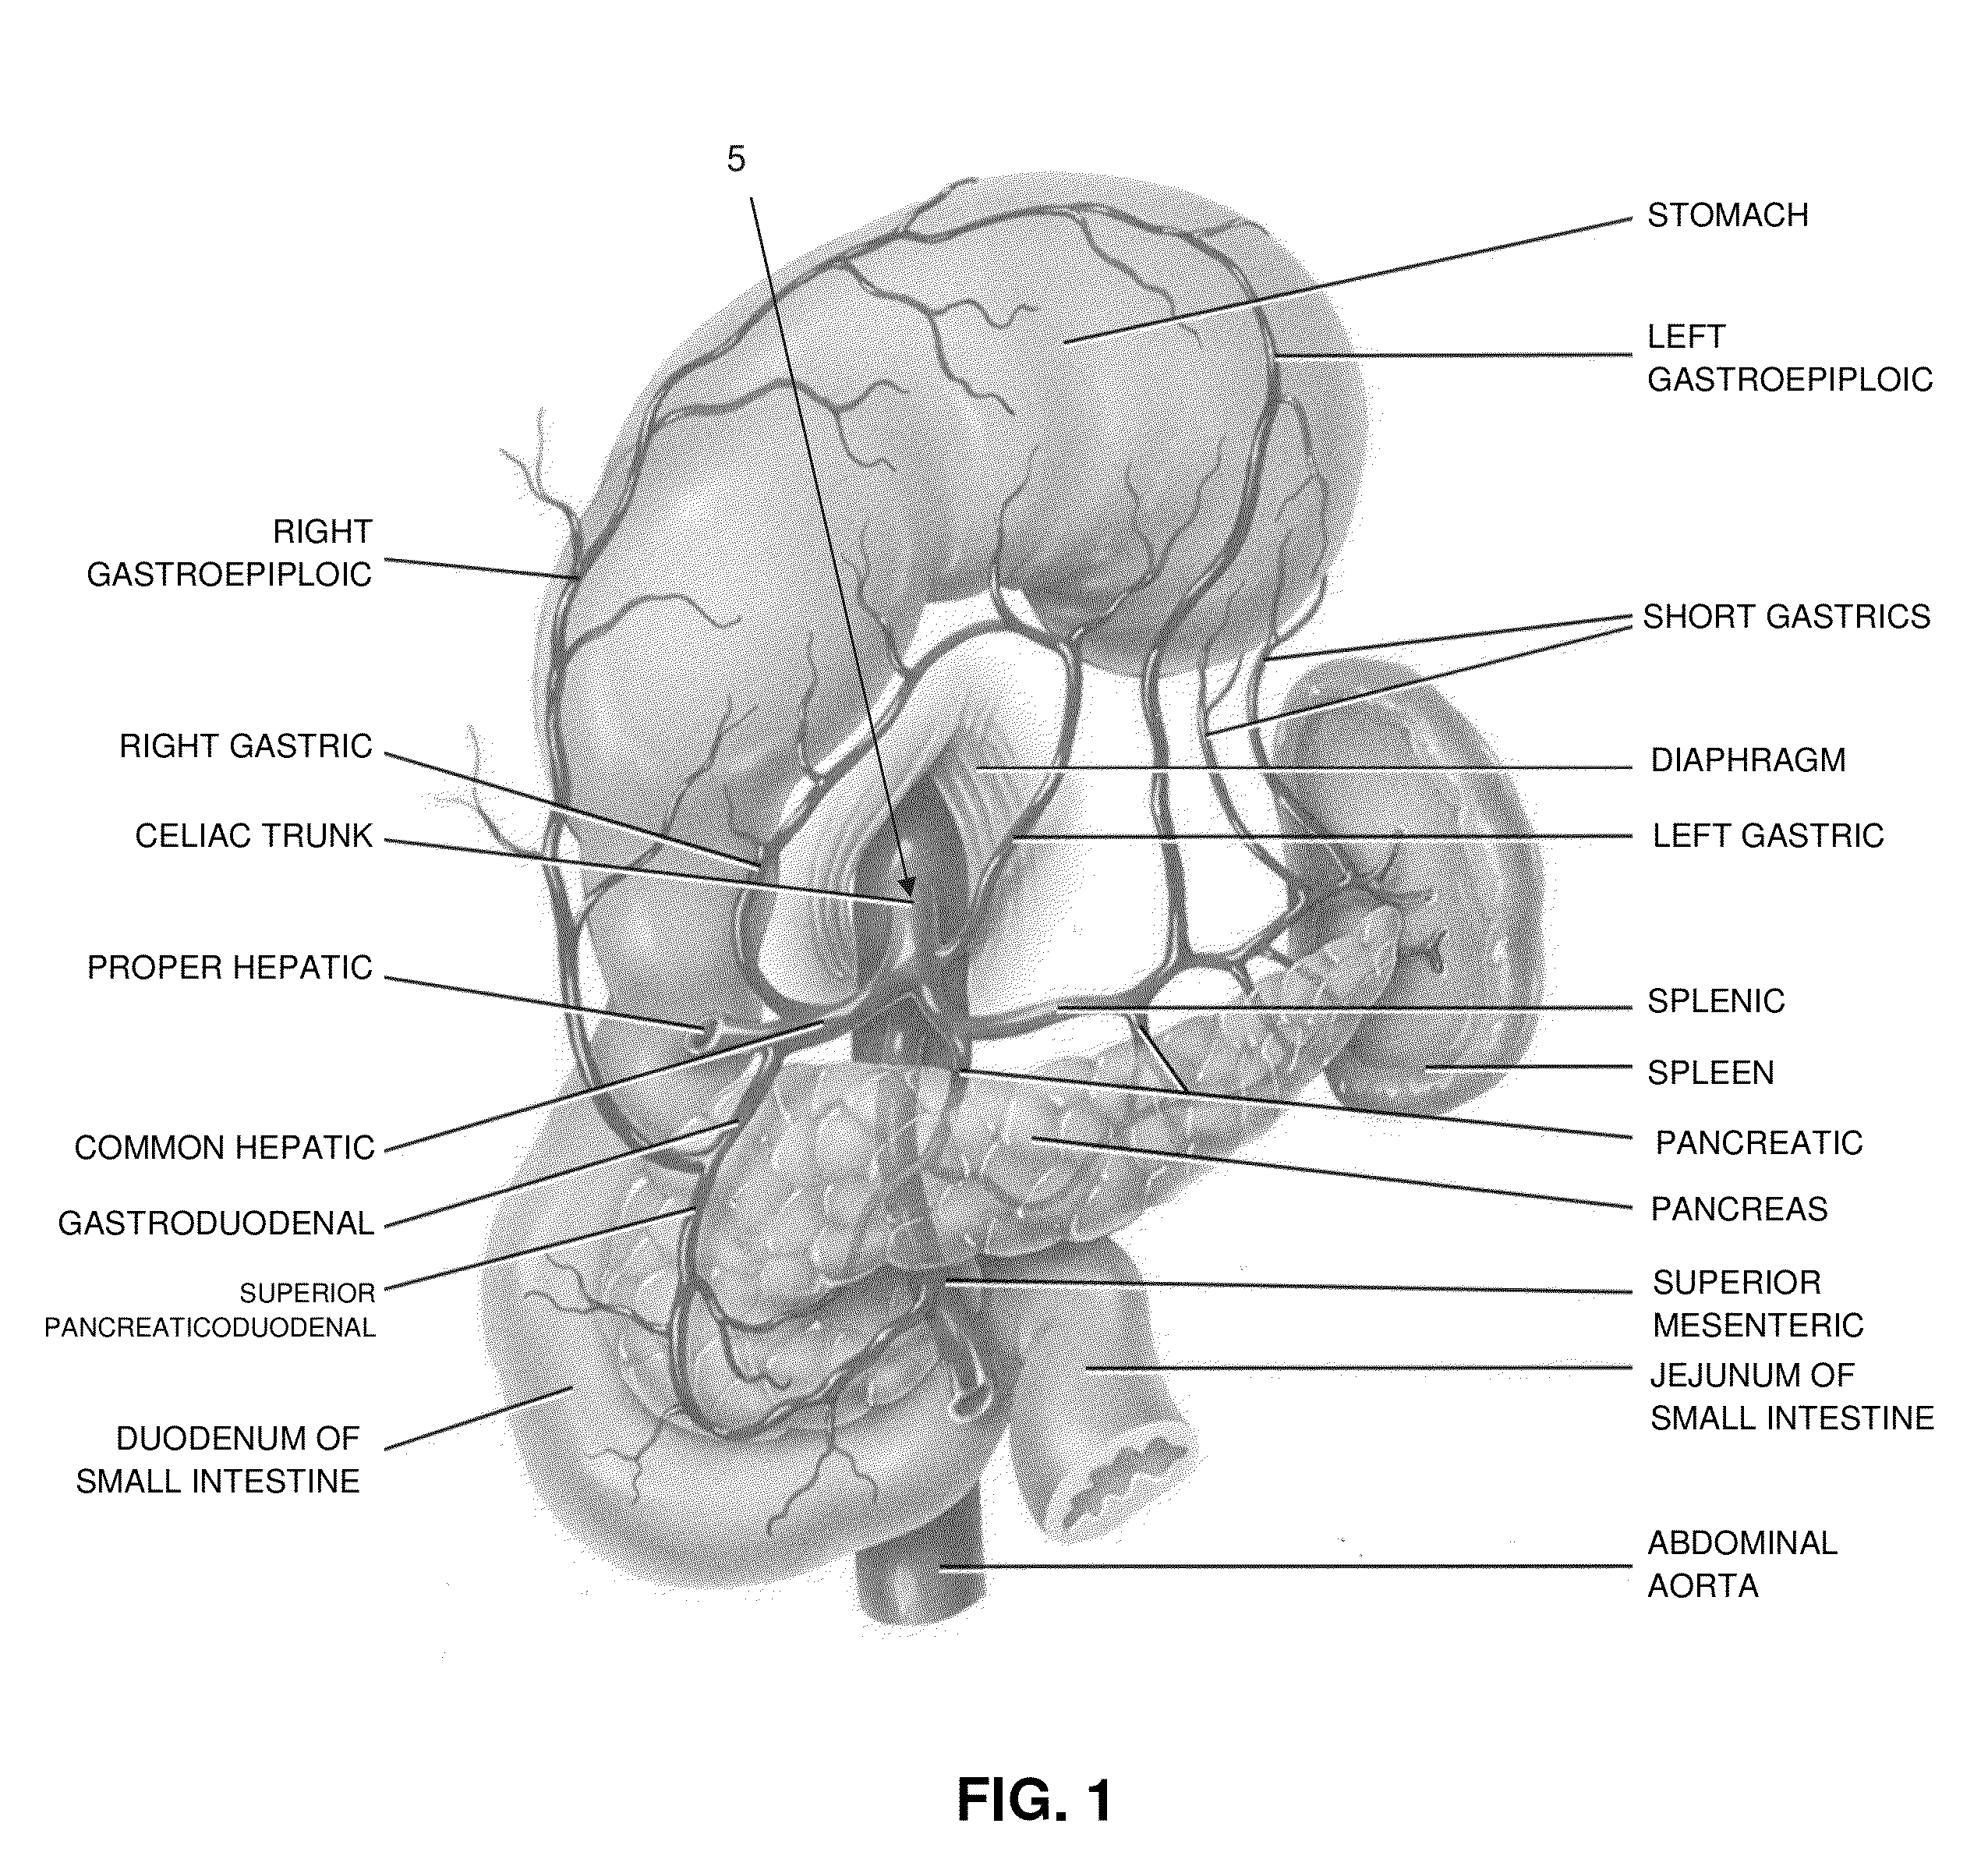 Method and apparatus for treating a patient by intentionally occluding a blood vessel, including method and apparatus for inducing weight loss in a patient by intentionally occluding the celiac artery